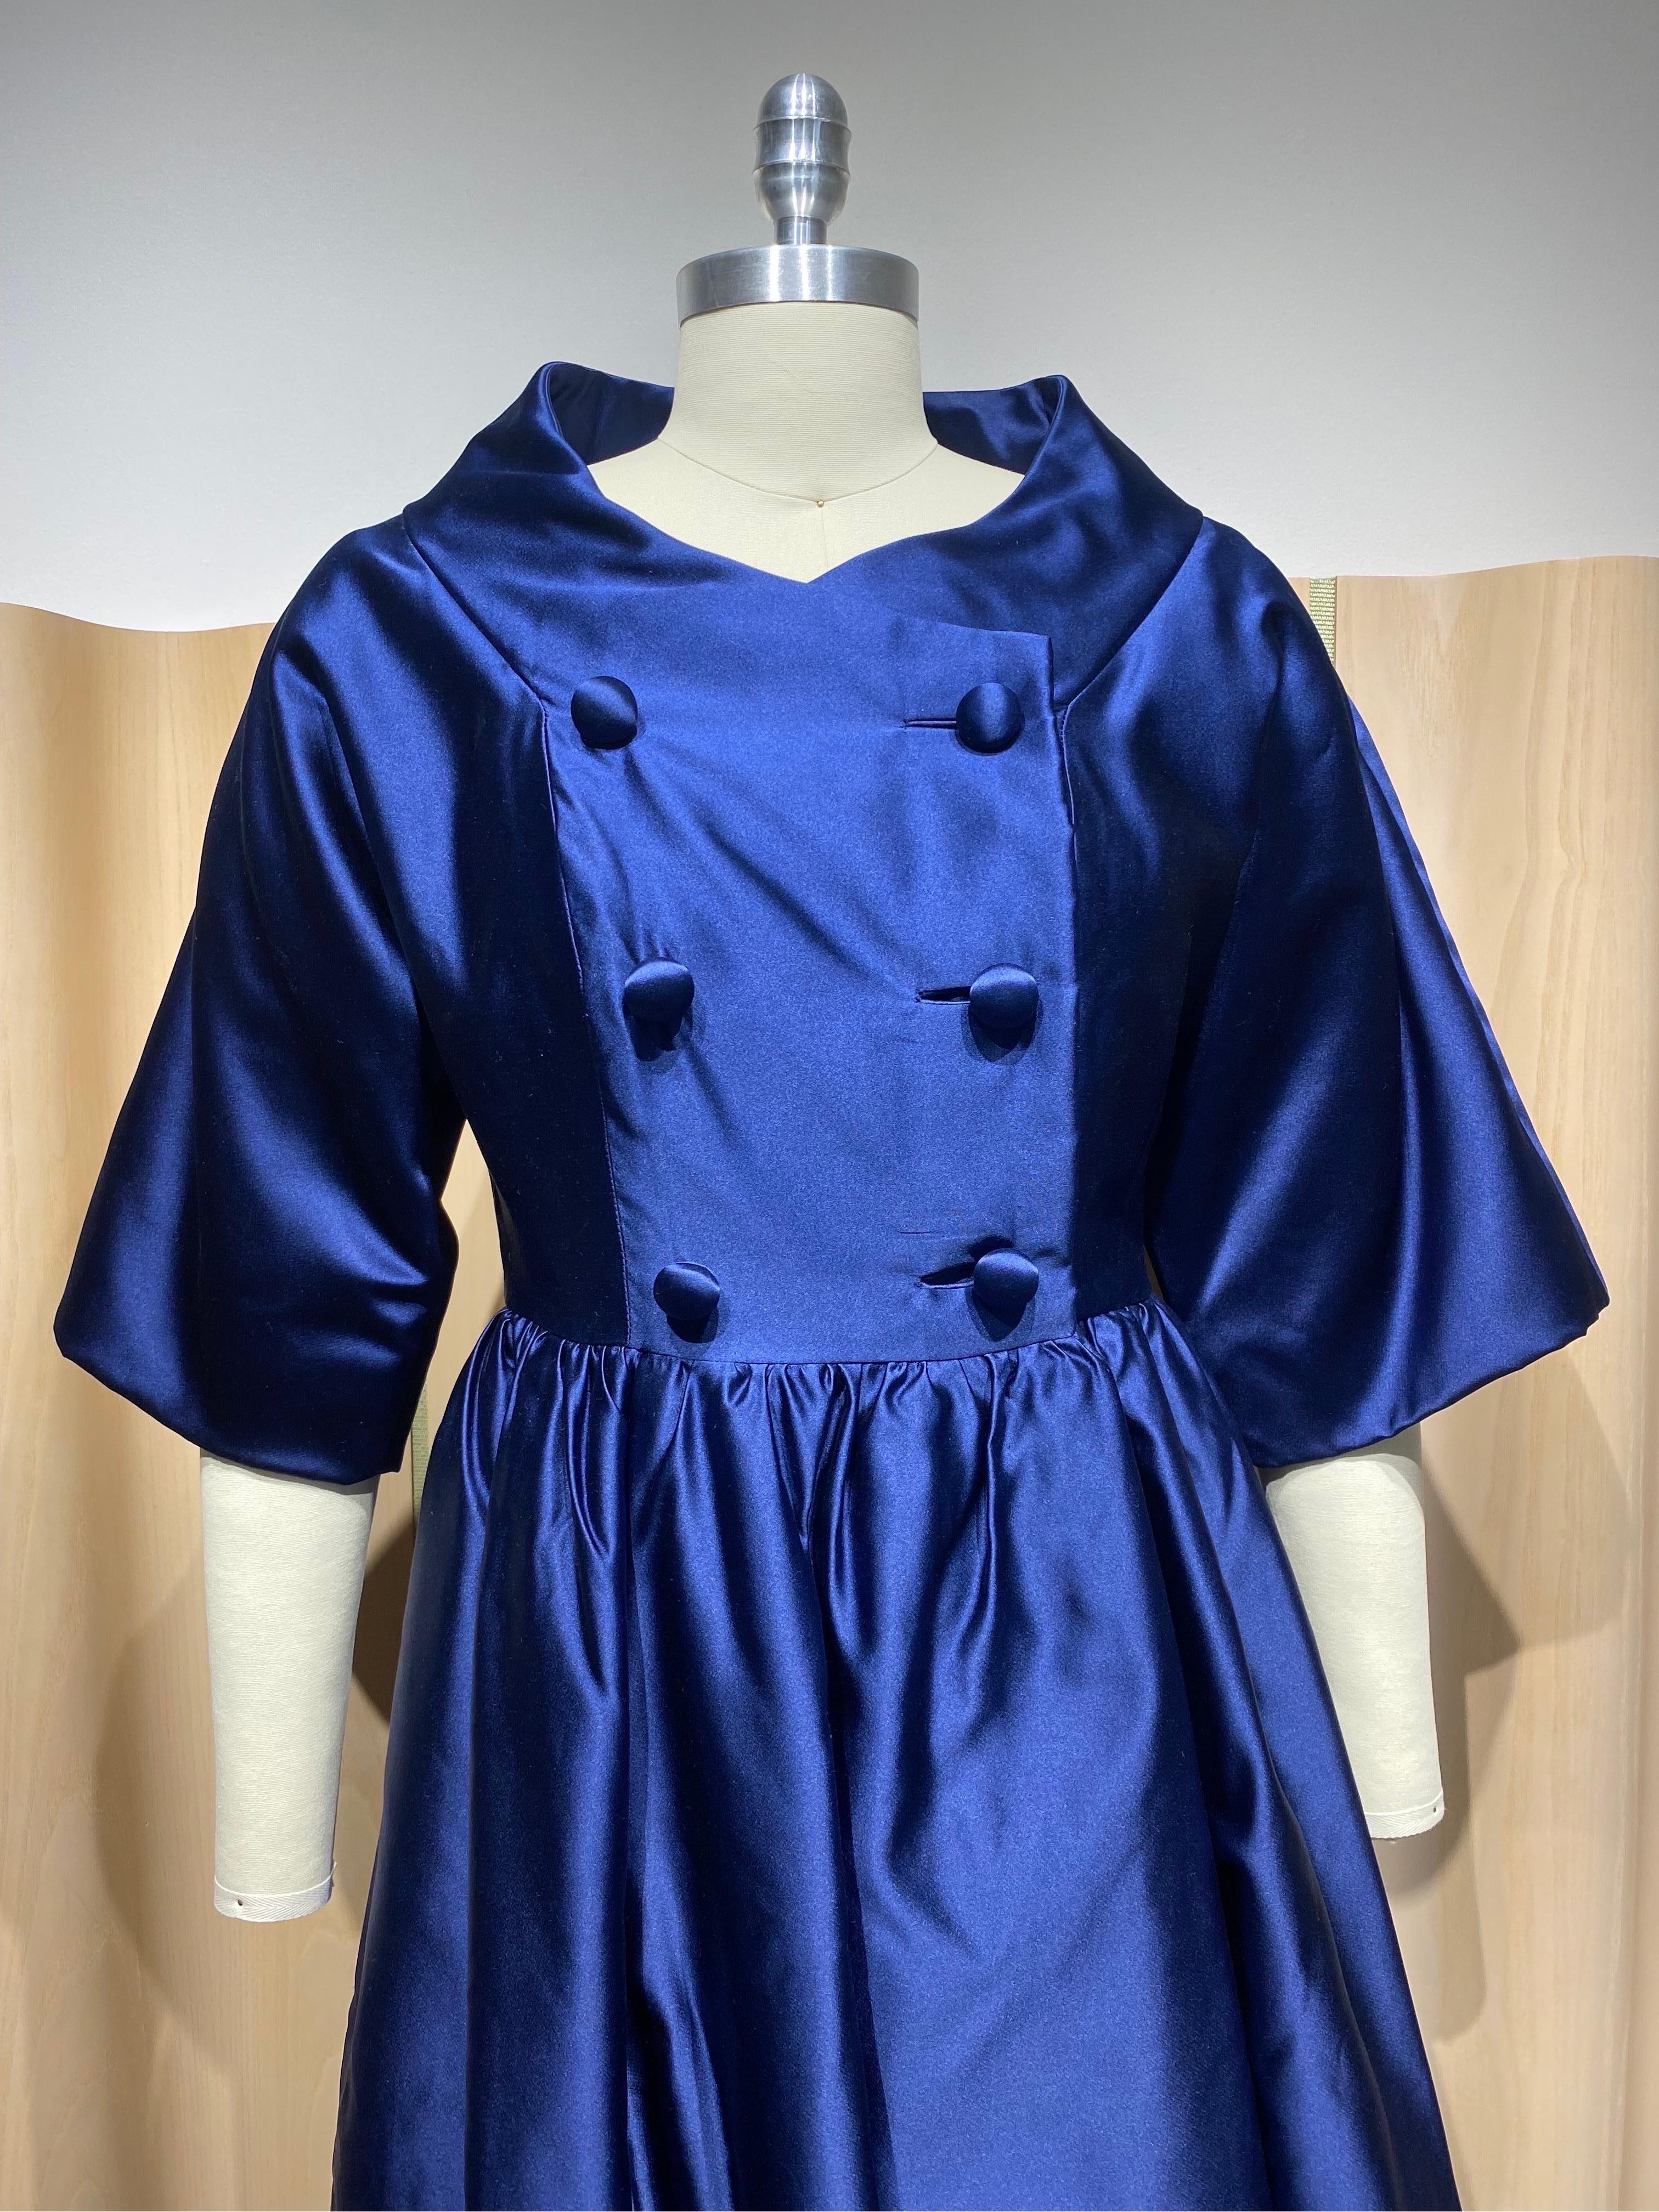 1960s Townley Evening Blue Silk Wrap Coat Dress. Perfect for cocktail party.
Coat is lined in Green silk. Very elegant.
Bust 33” / Waist 28”/ Hip 45” / Coat Length 55” / sleeve length 18”